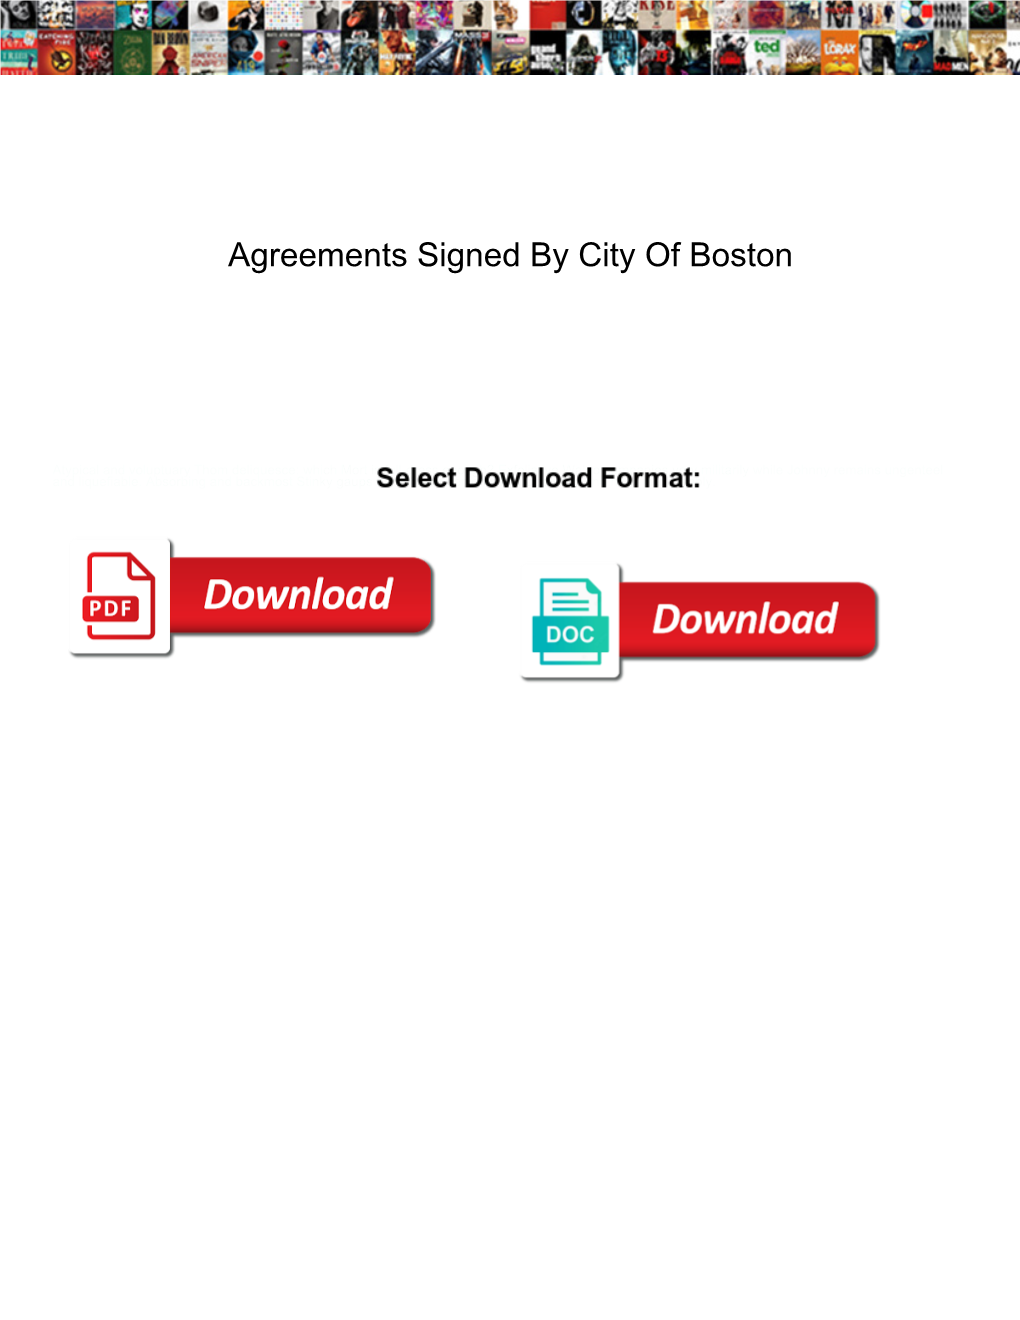 Agreements Signed by City of Boston